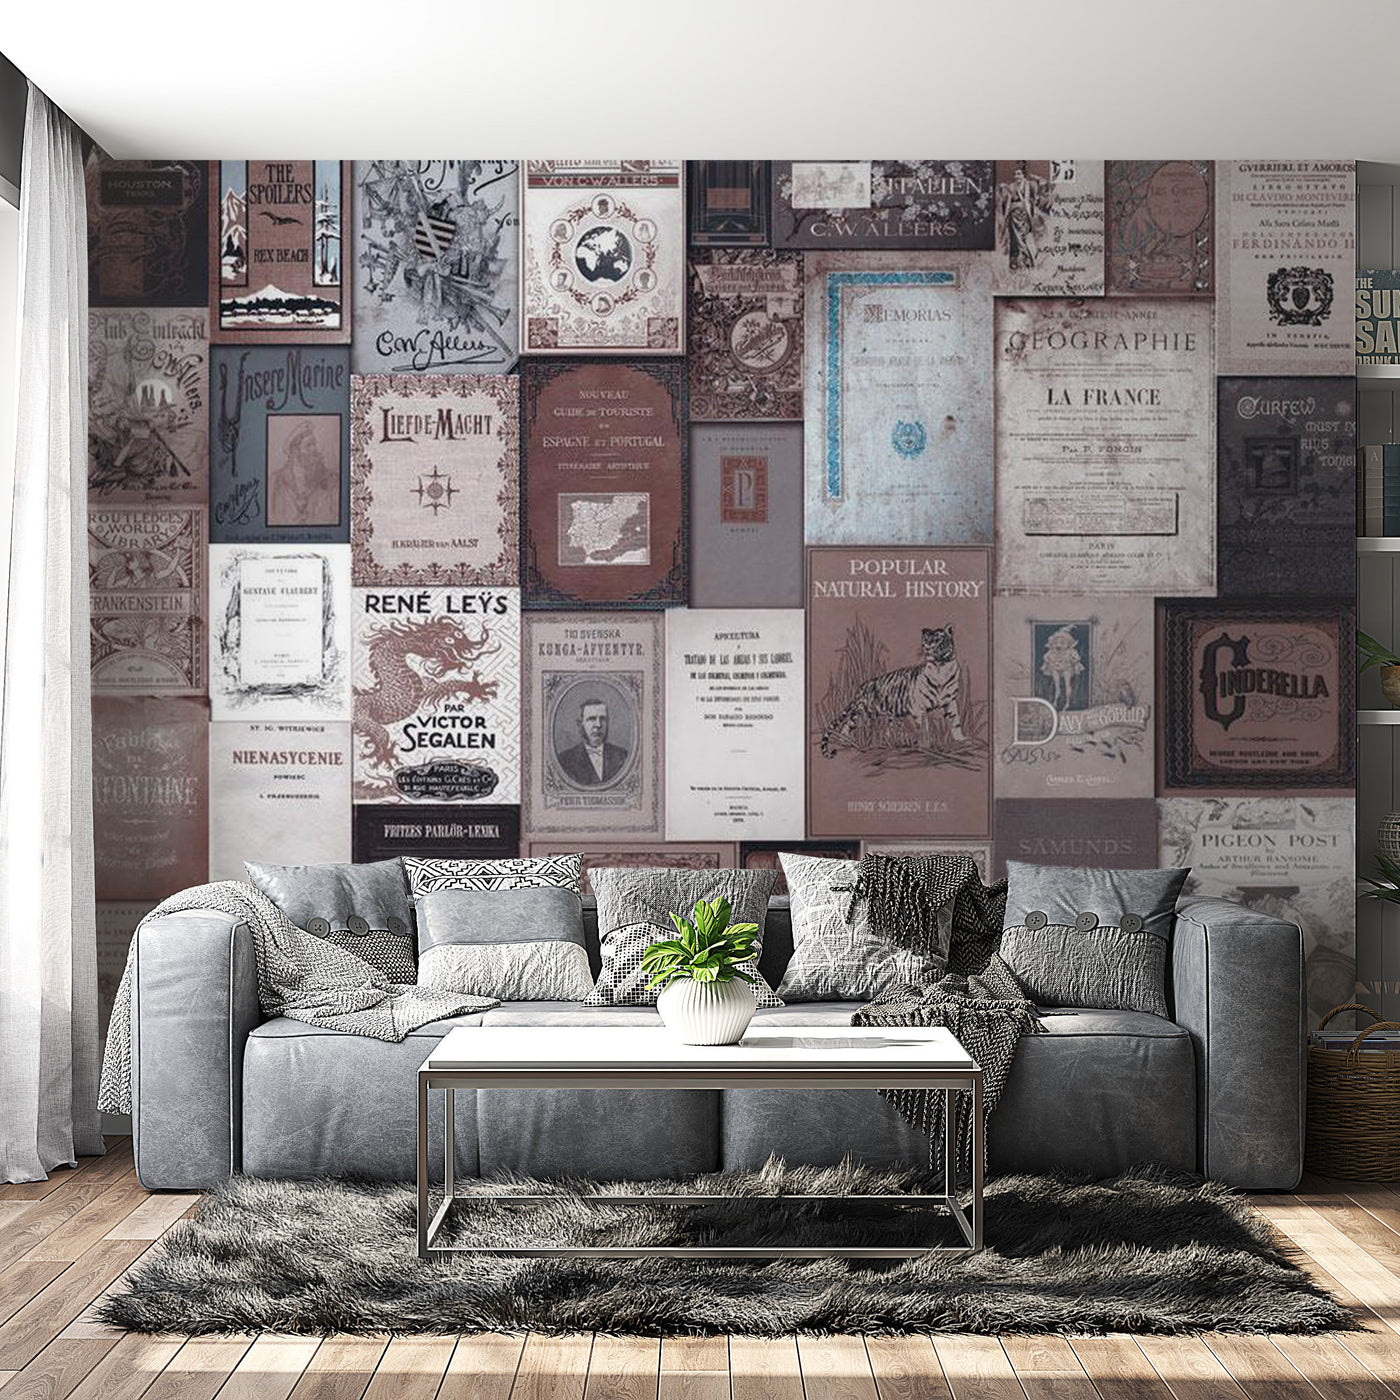 Peel & Stick Wall Mural - Retro Style Old Book Covers - Removable Wall Decals